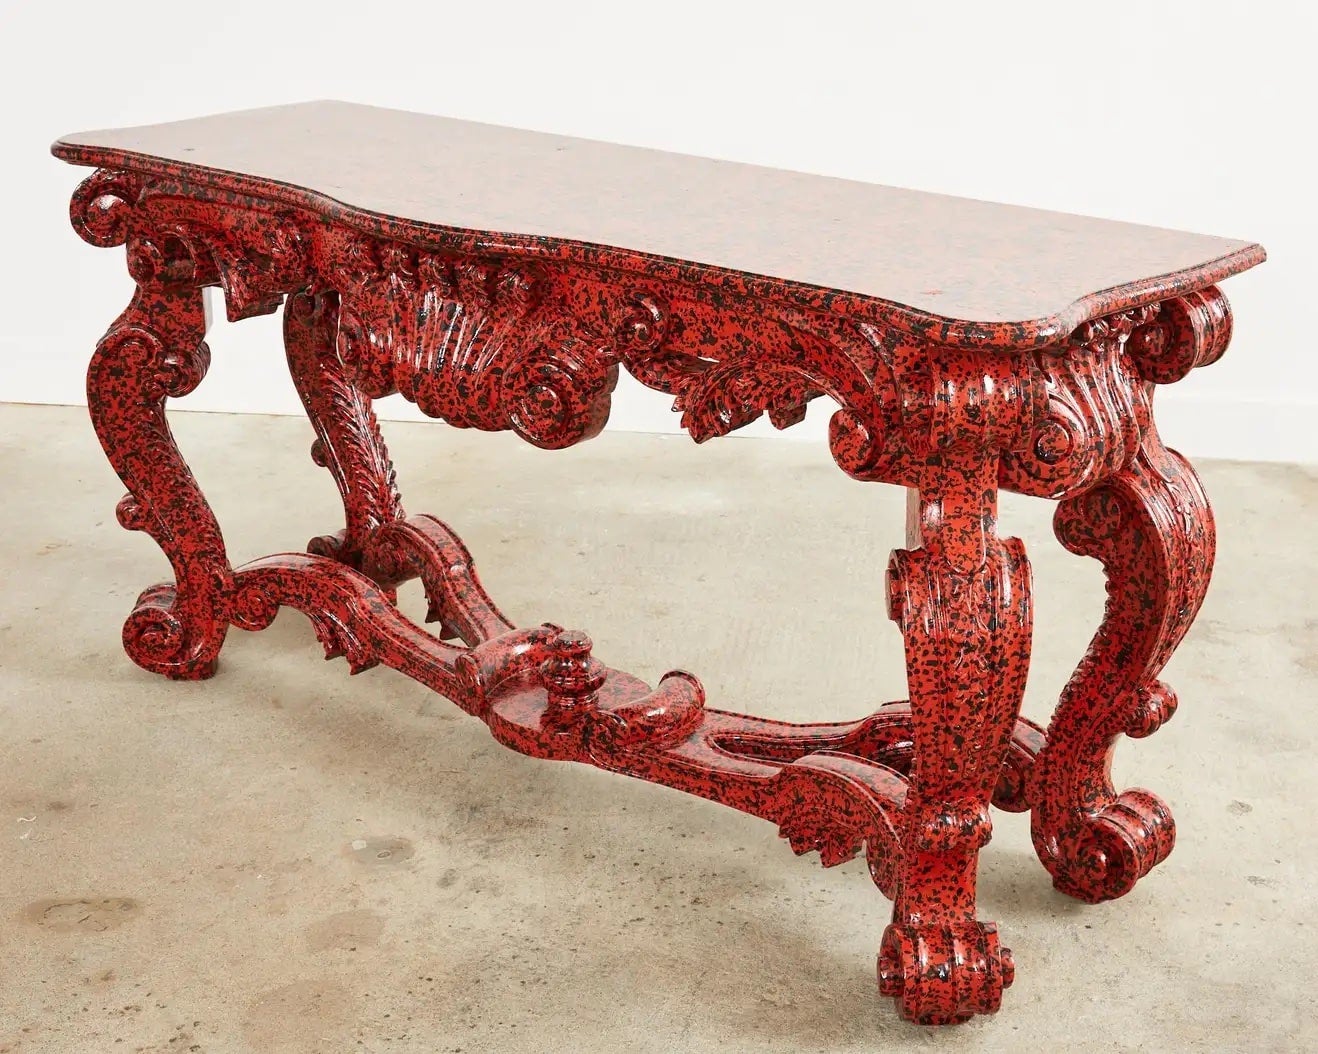 Painter Ira Yeager Customized This Antique Table with His Trademark Speckled Finish